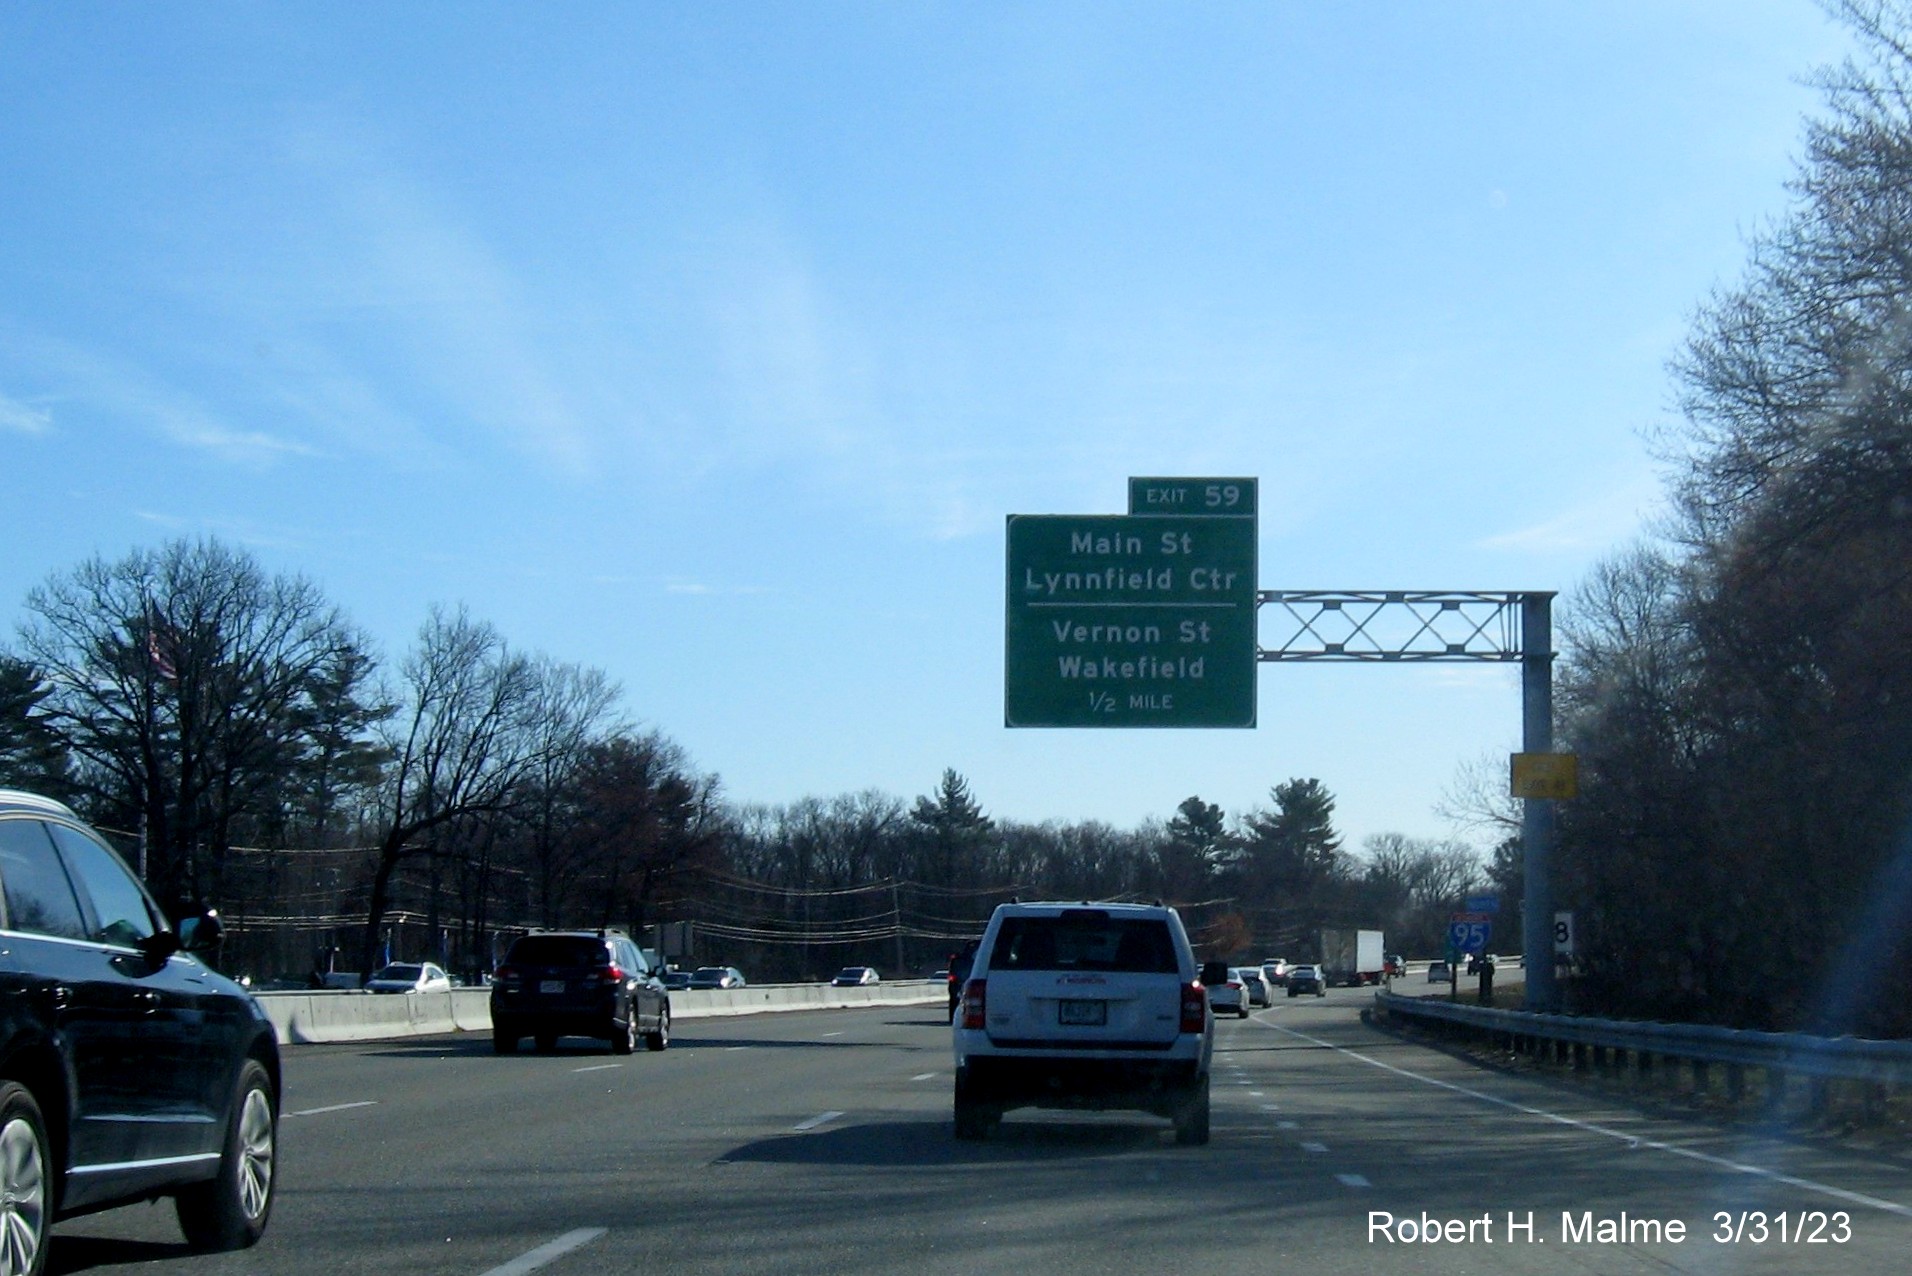 Image of recently placed 1/2 Mile overhead sign for the Main Street/Vernon Street exit on I-95/MA 128 North in Wakefield, March 2023